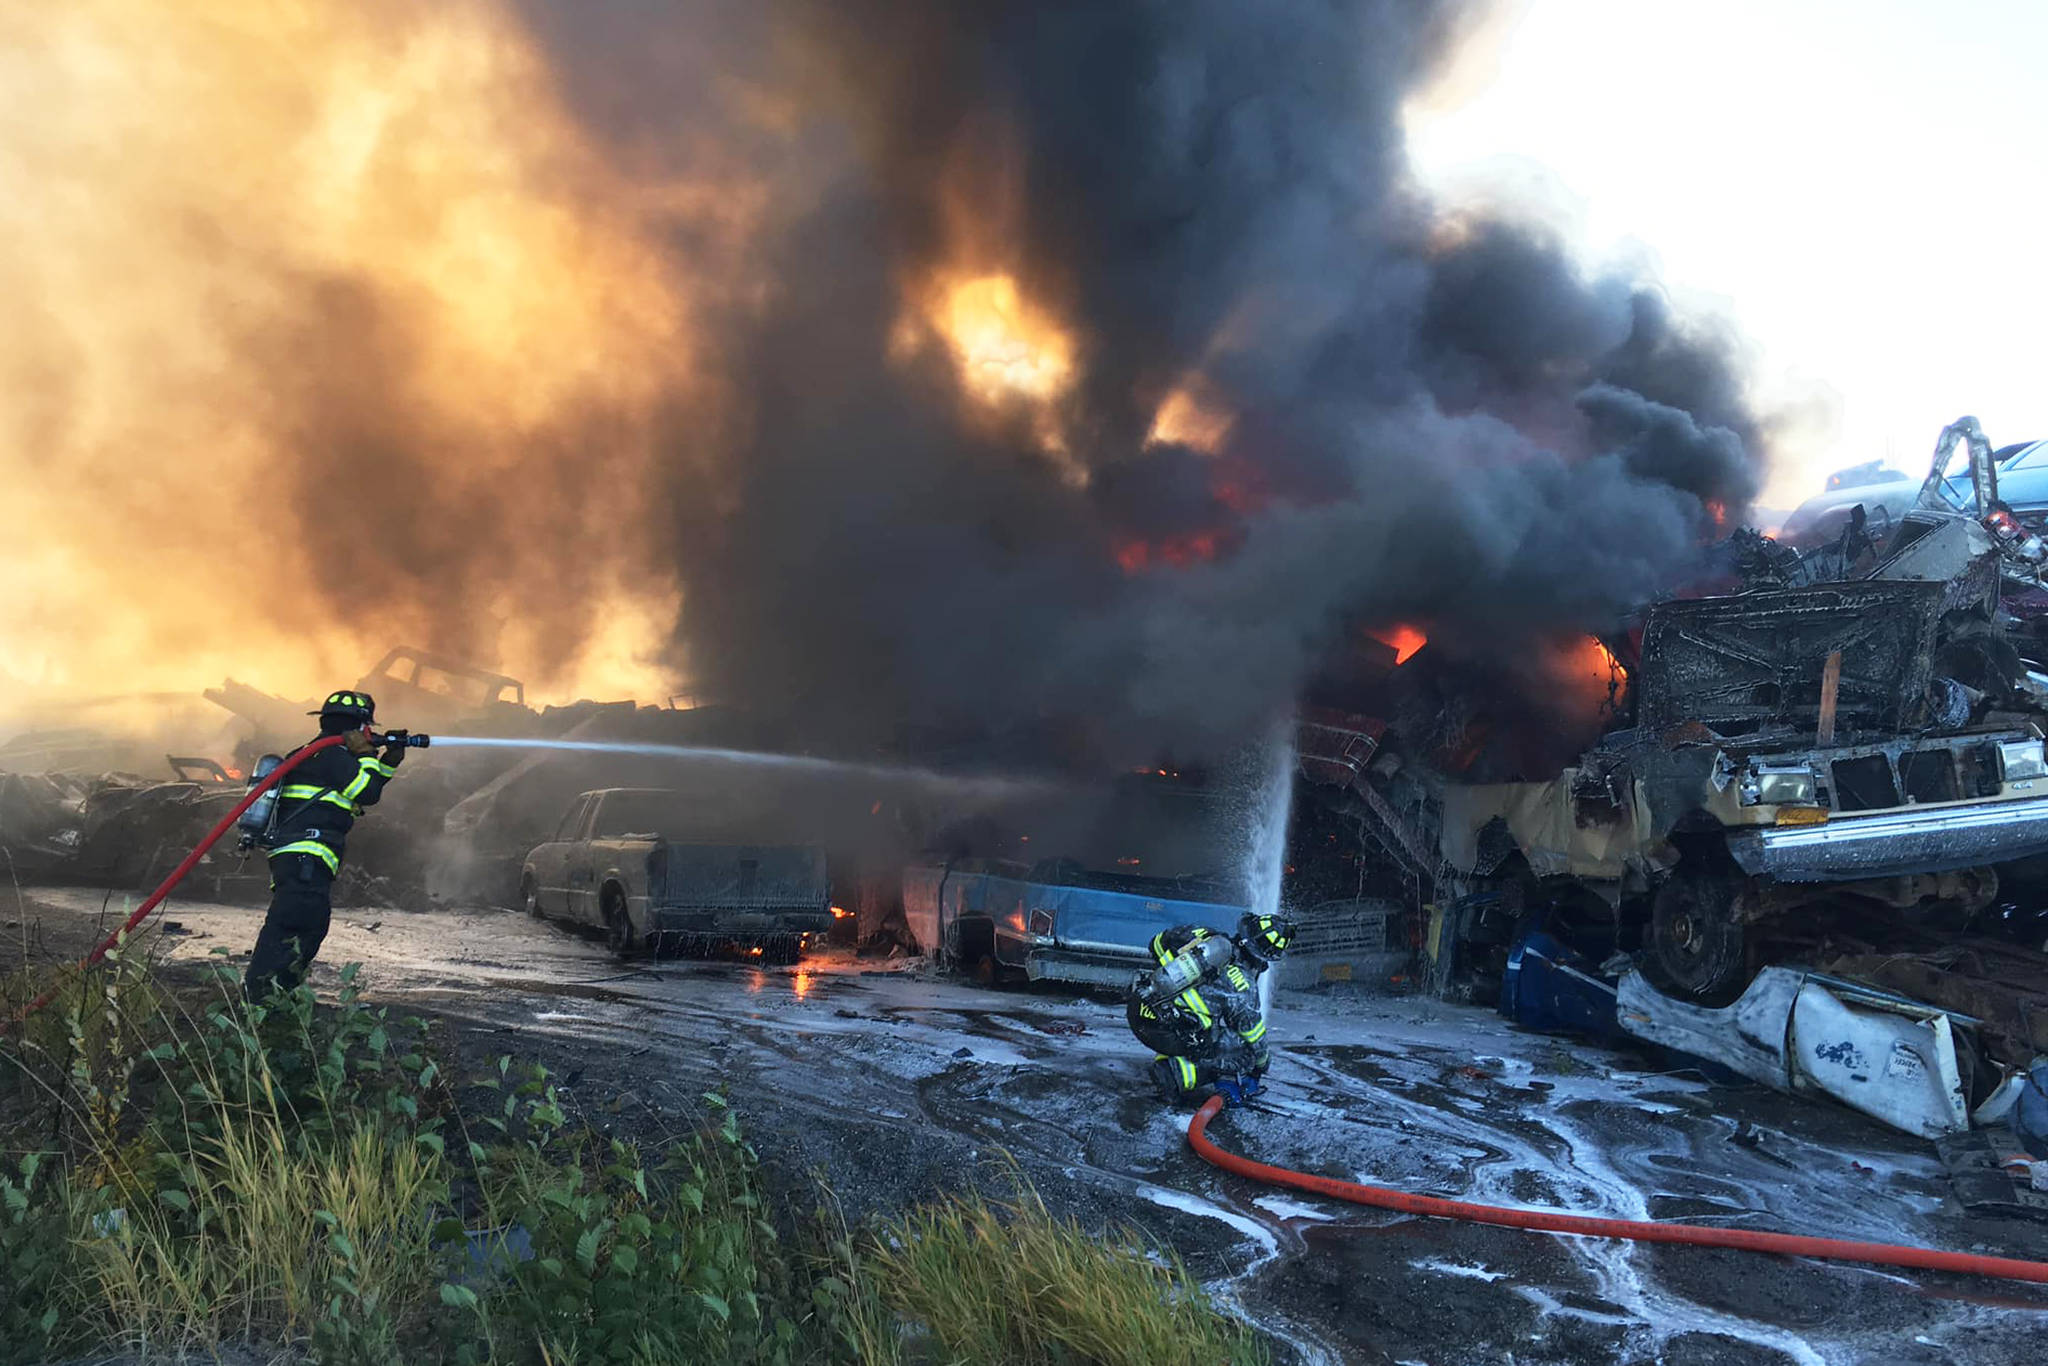 Firefighters work to extinguish a fire in a pile of scrap vehicles on Greenfield Road on Sunday, Oct. 6, 2019 in Anchor Point, Alaska. (Photo courtesy Anchor Point Fire and Emergency Services)